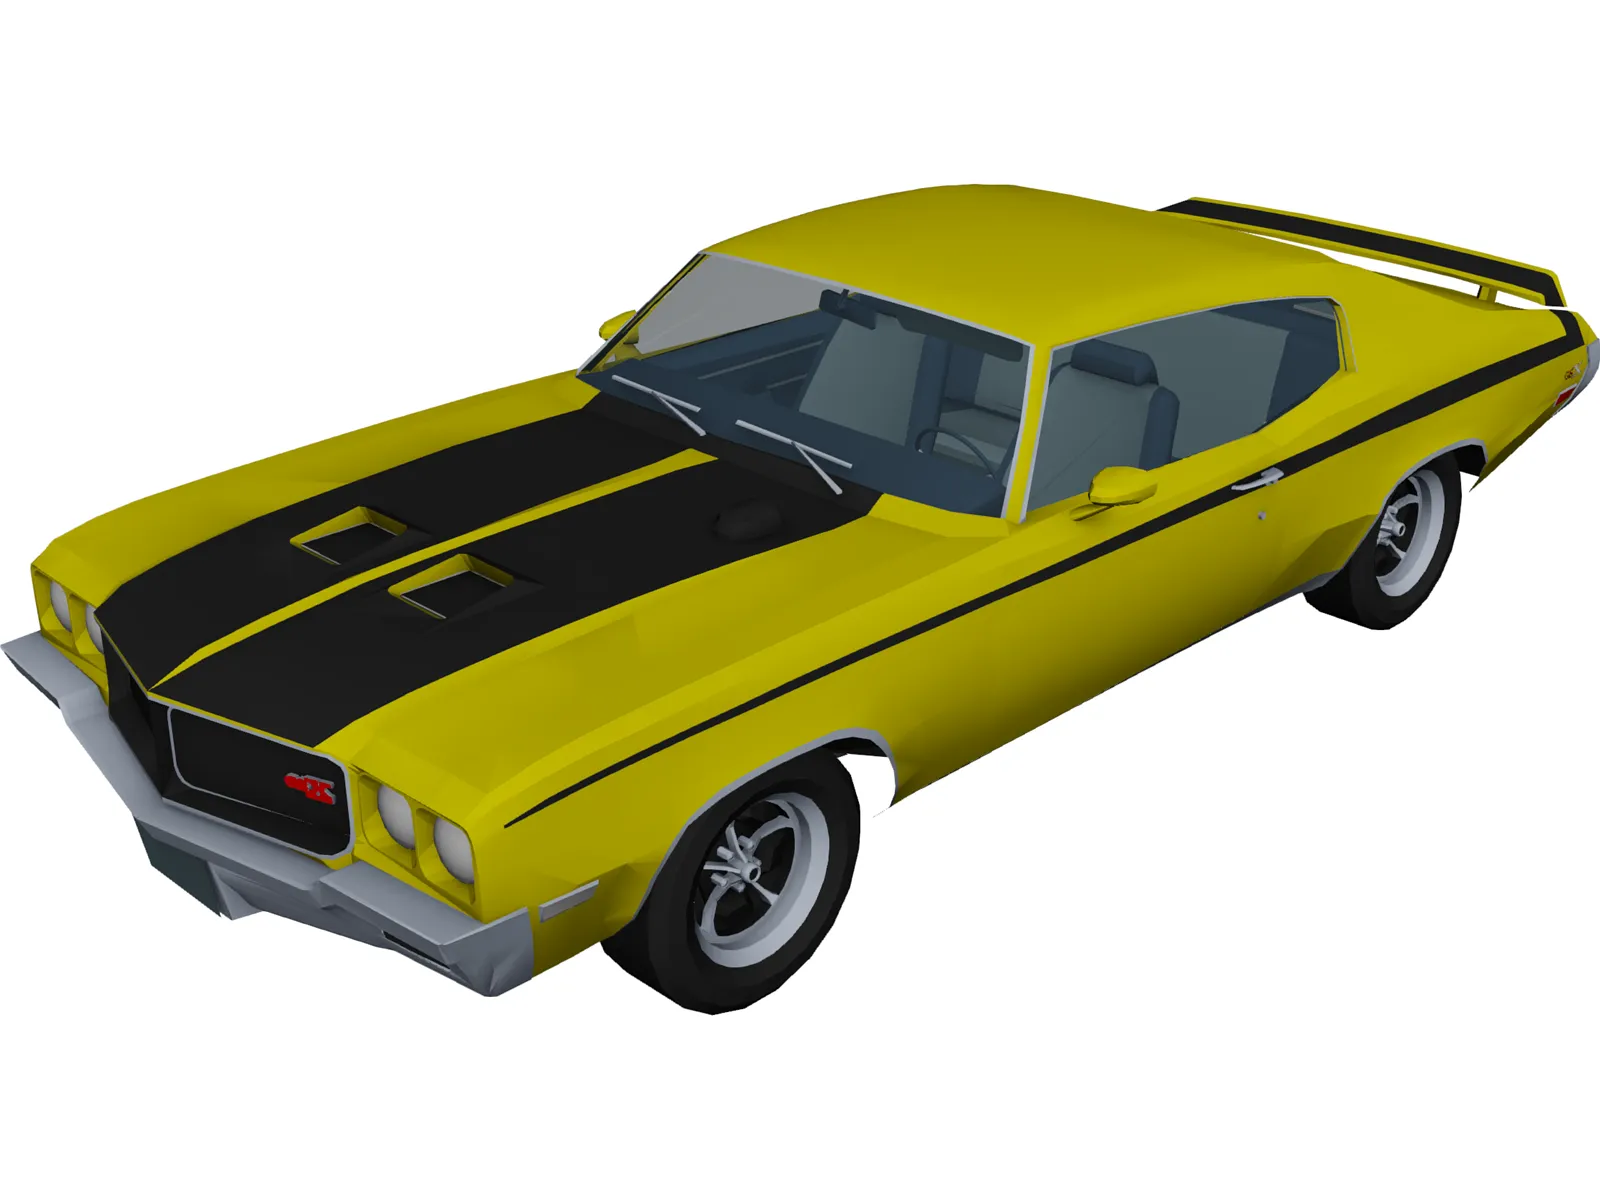 Buick GSX Stage 1 (1970) 3D Model